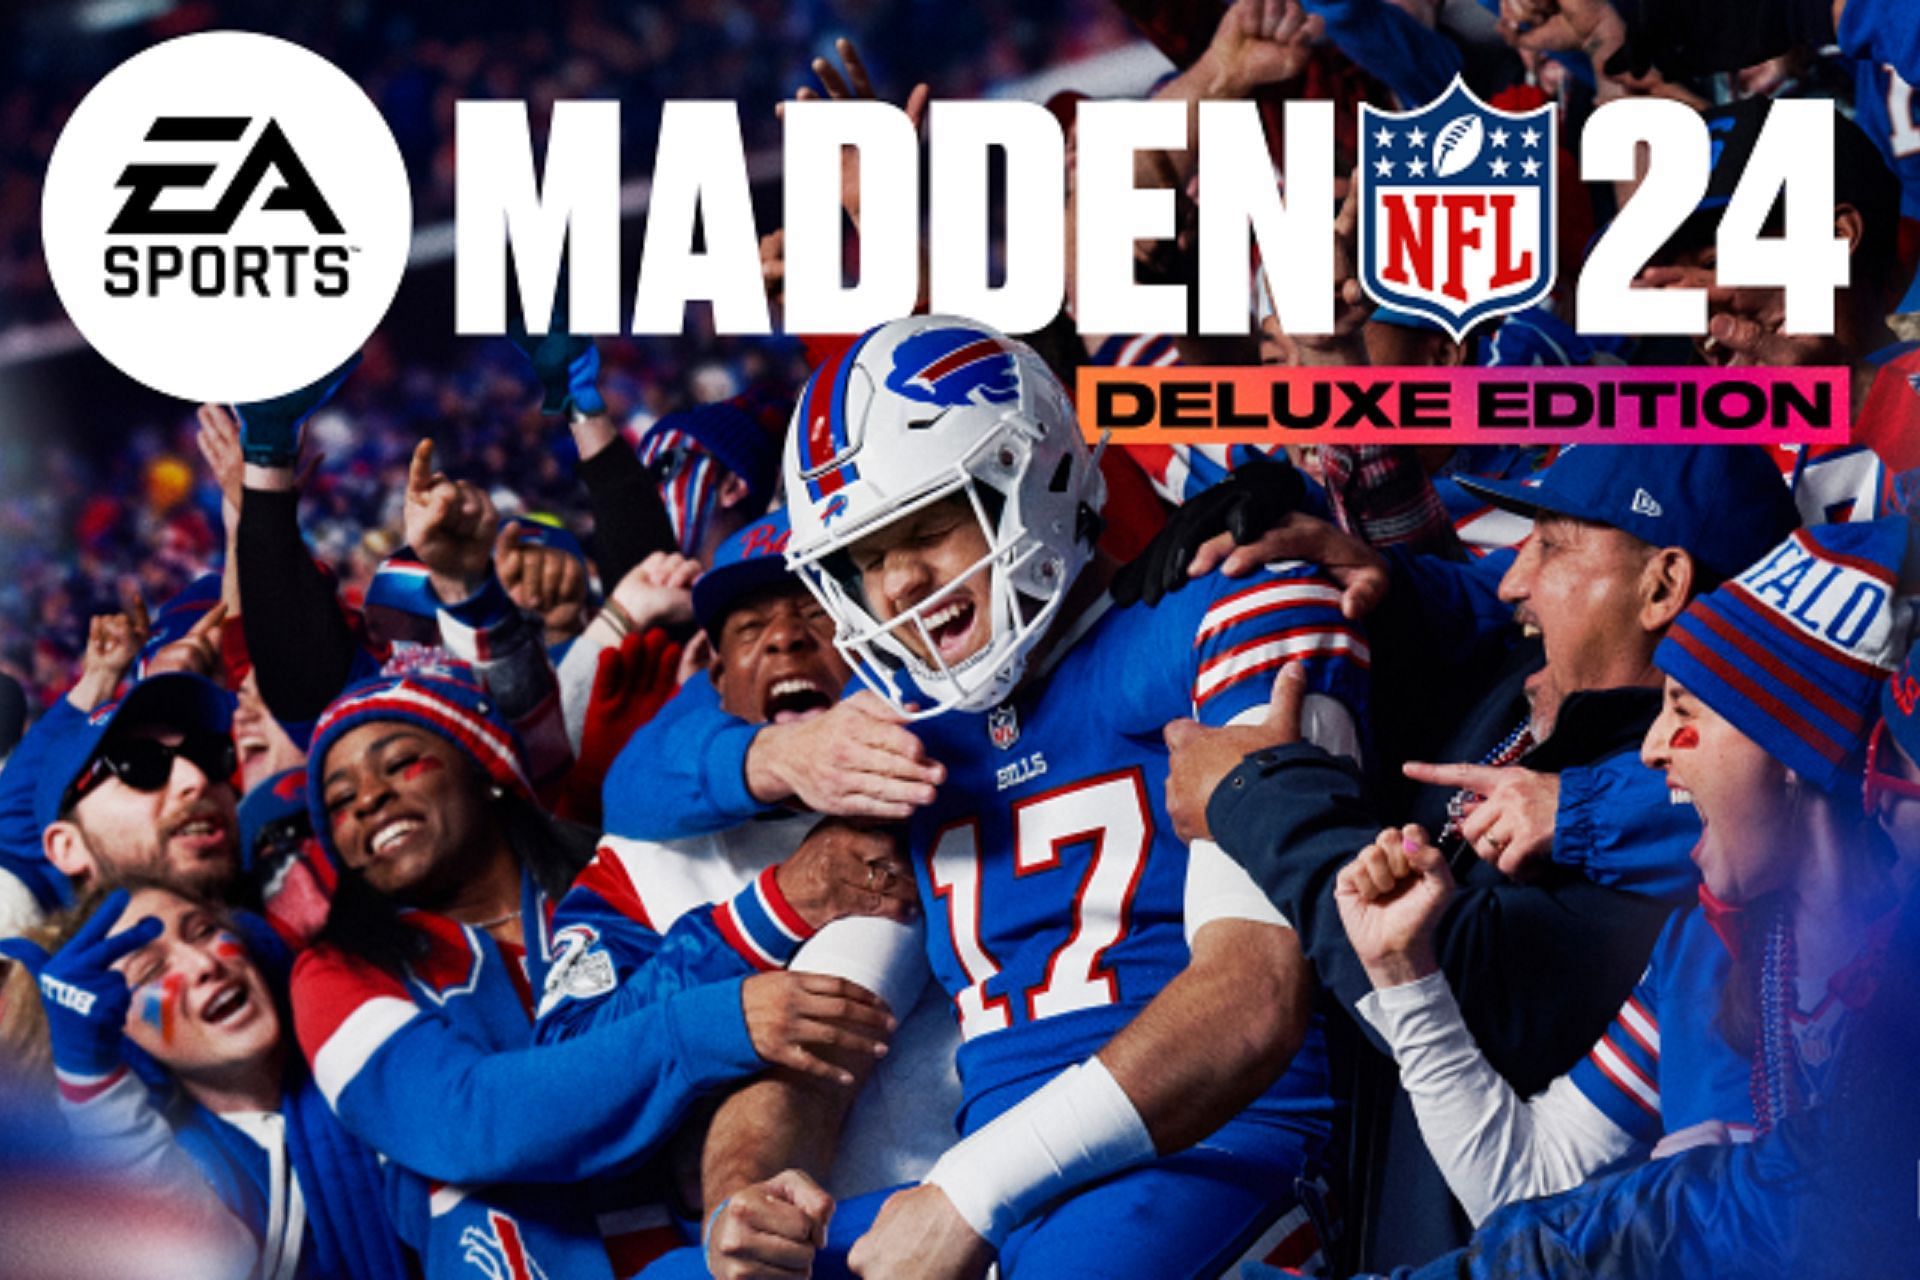 Madden 24 Beta Top 5 new features uncovered so far ahead of August release